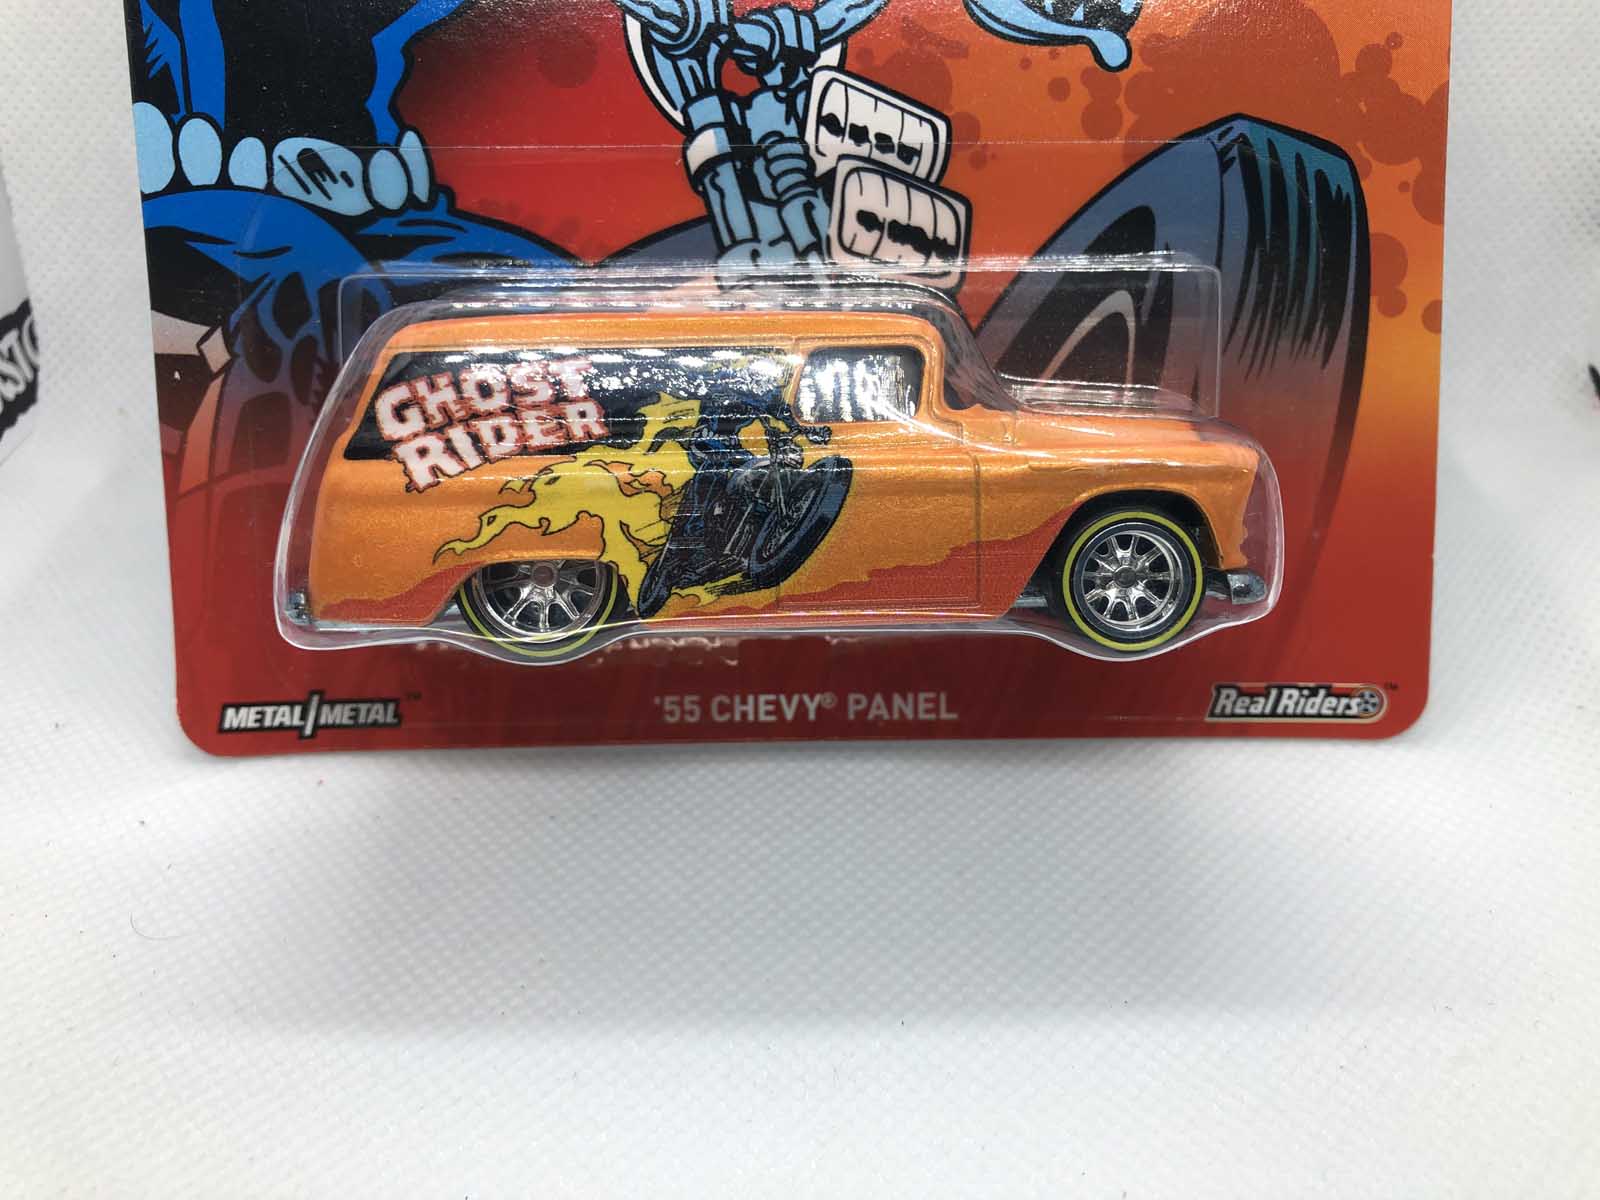 2017 Hot Wheels Pop Culture Mad Magazine '55 Chevy Panel Redline Real Riders